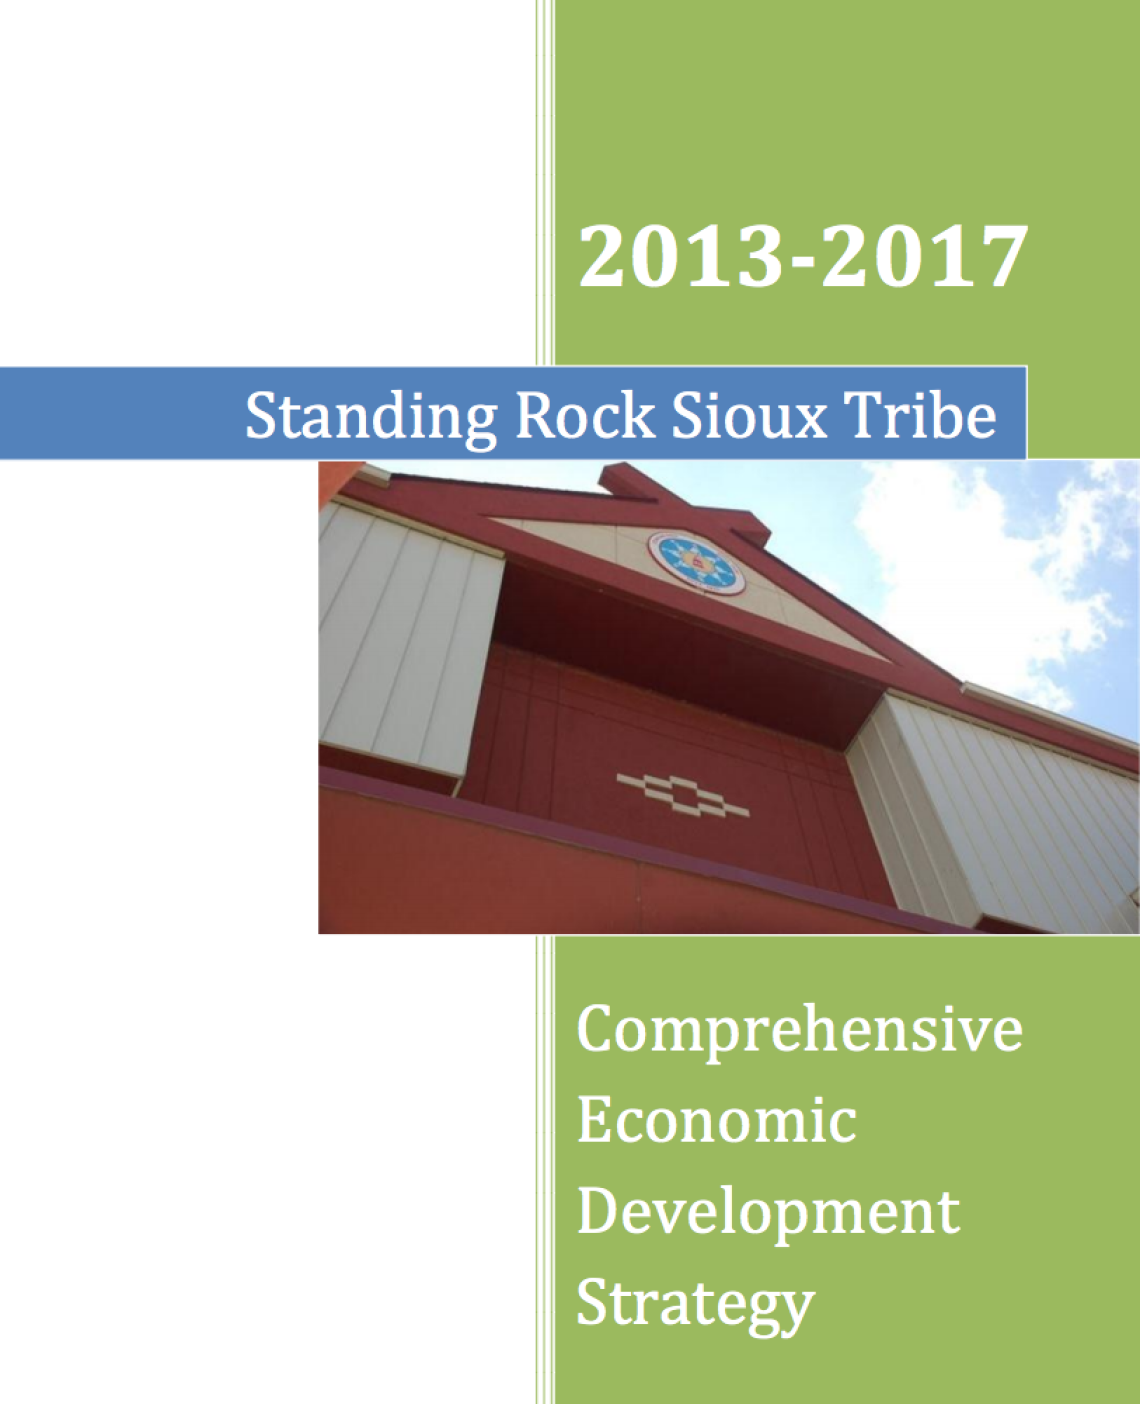 Standing Rock Sioux Tribe: Comprehensive Economic Development Strategy